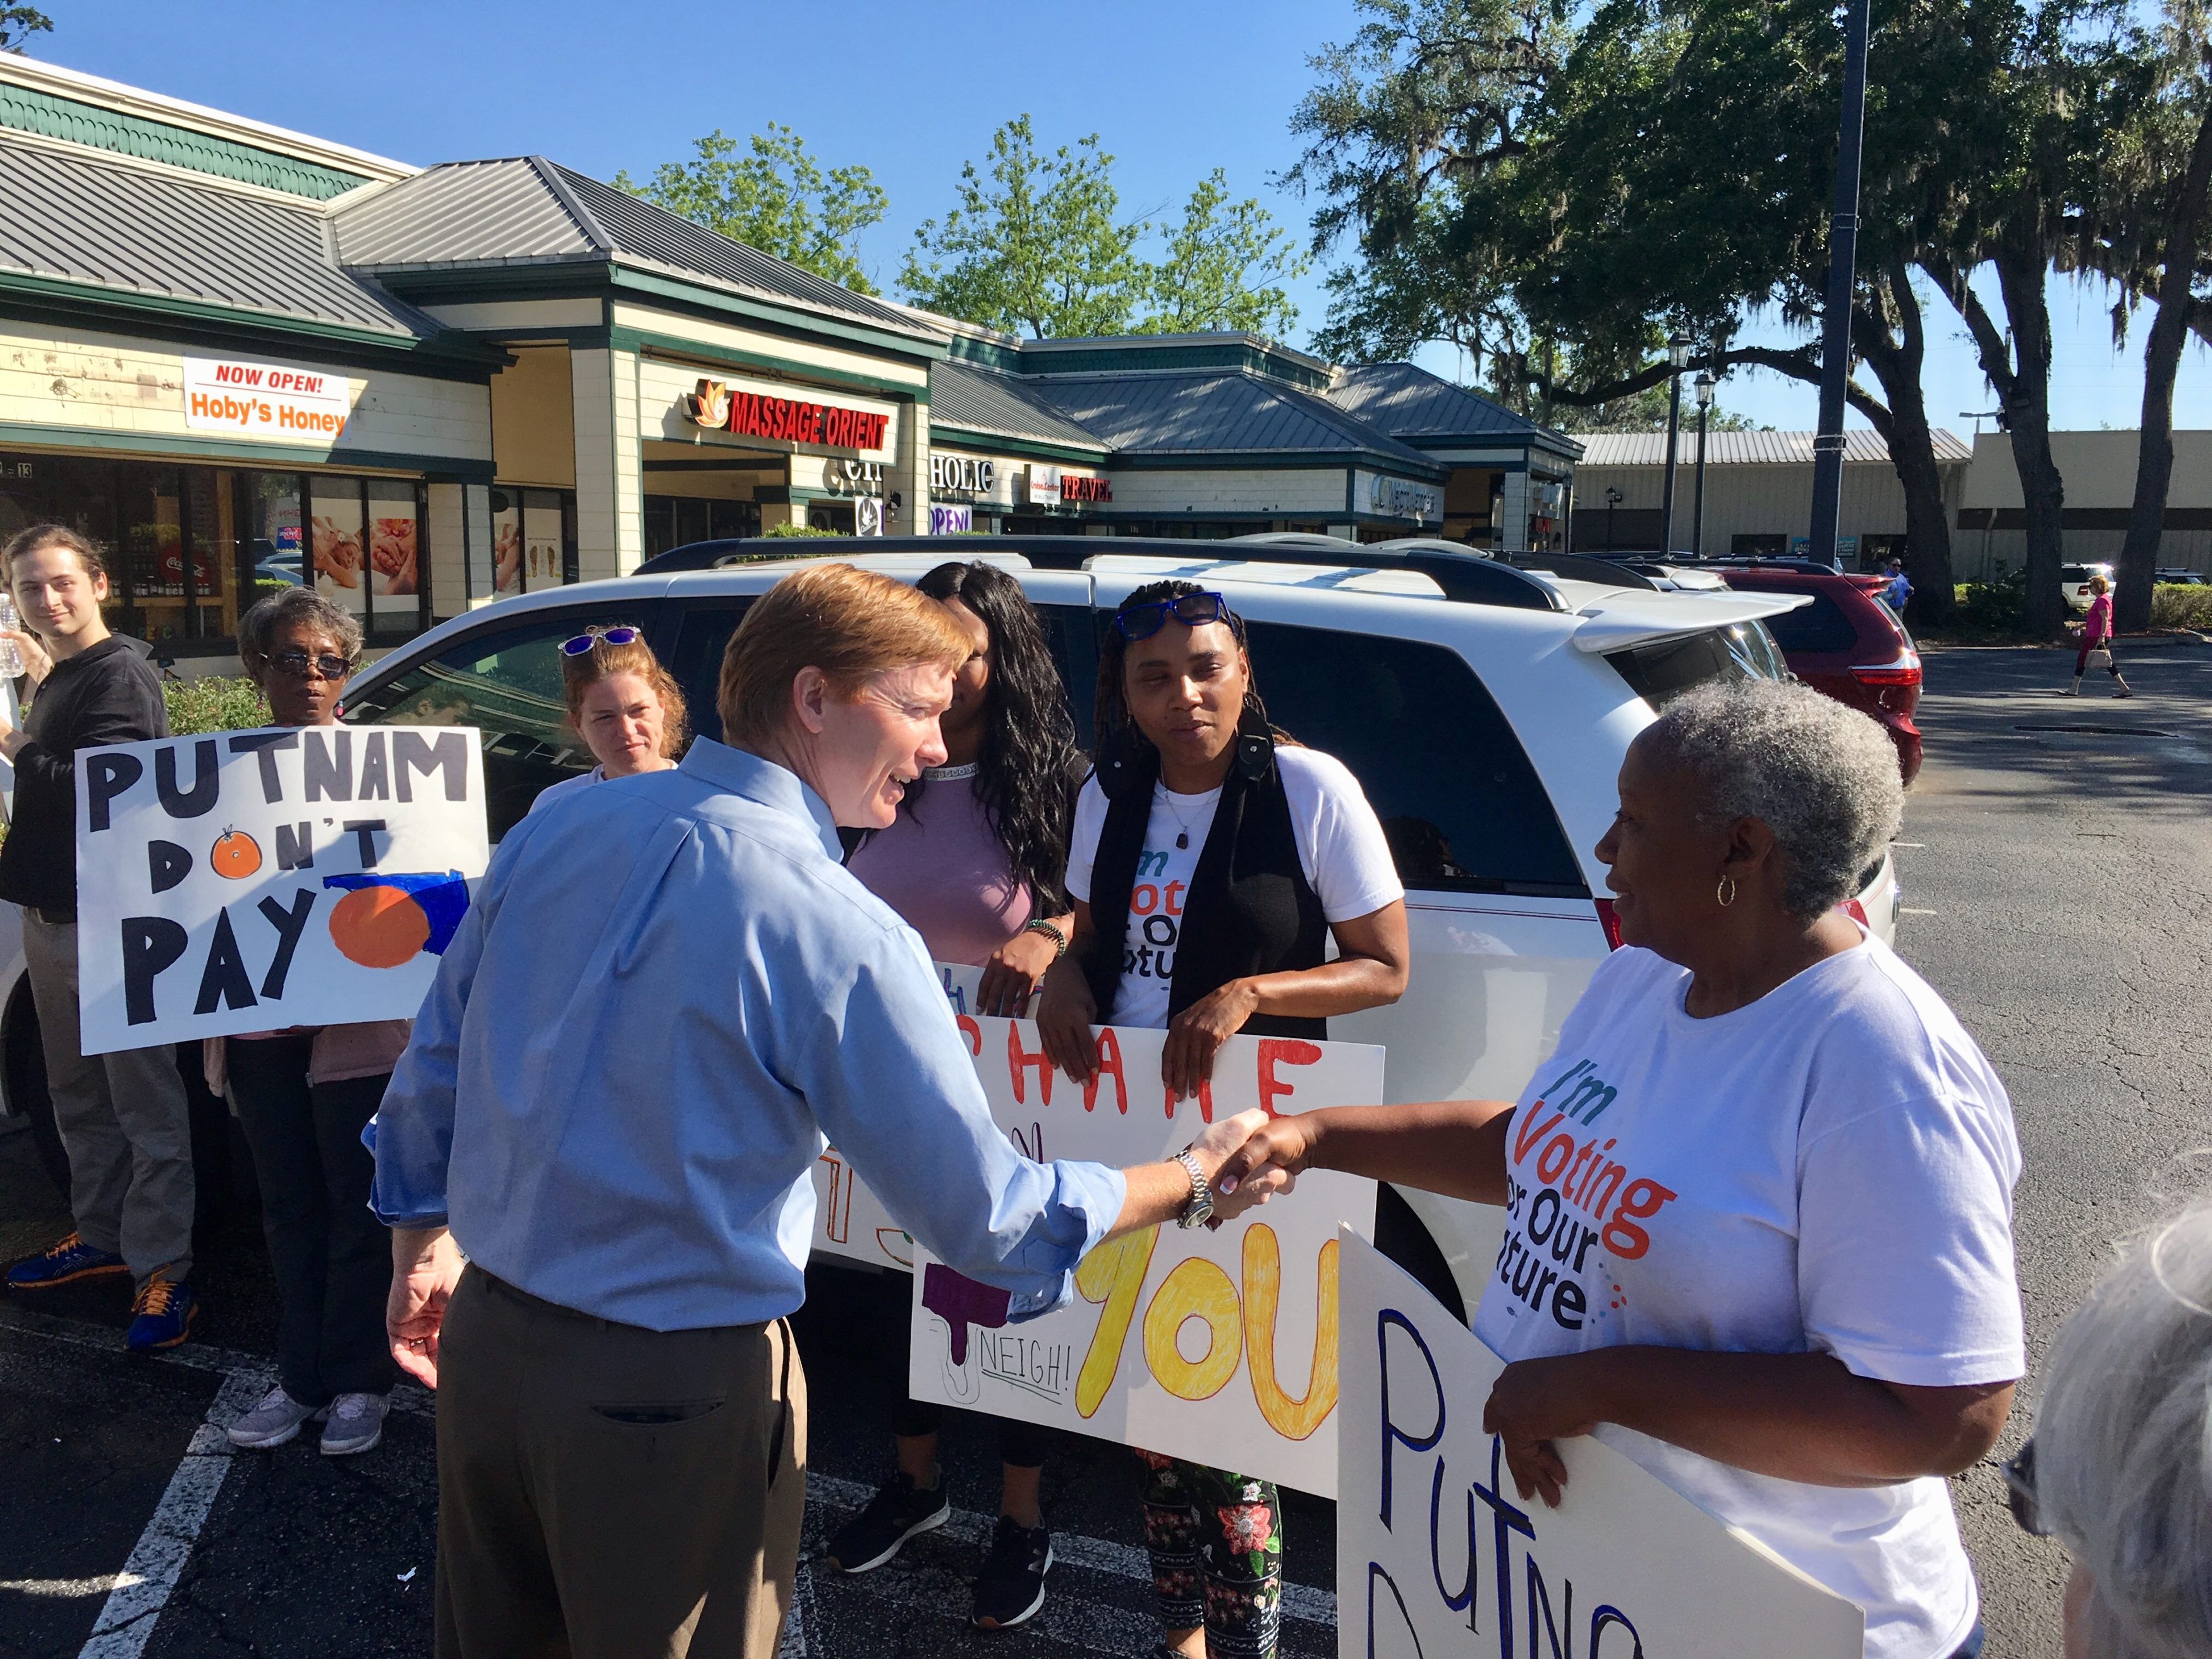 Adam Putnam delivers general election pitch, disarms protesters in ...